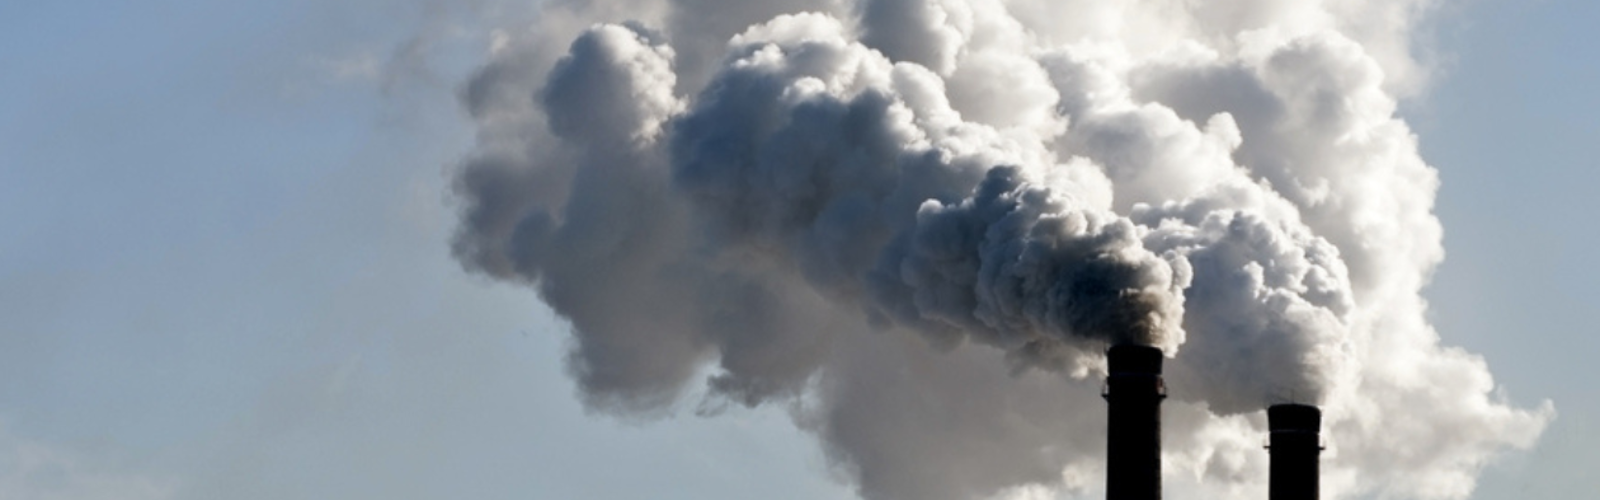 Emissions being spewed into the air from a power plant